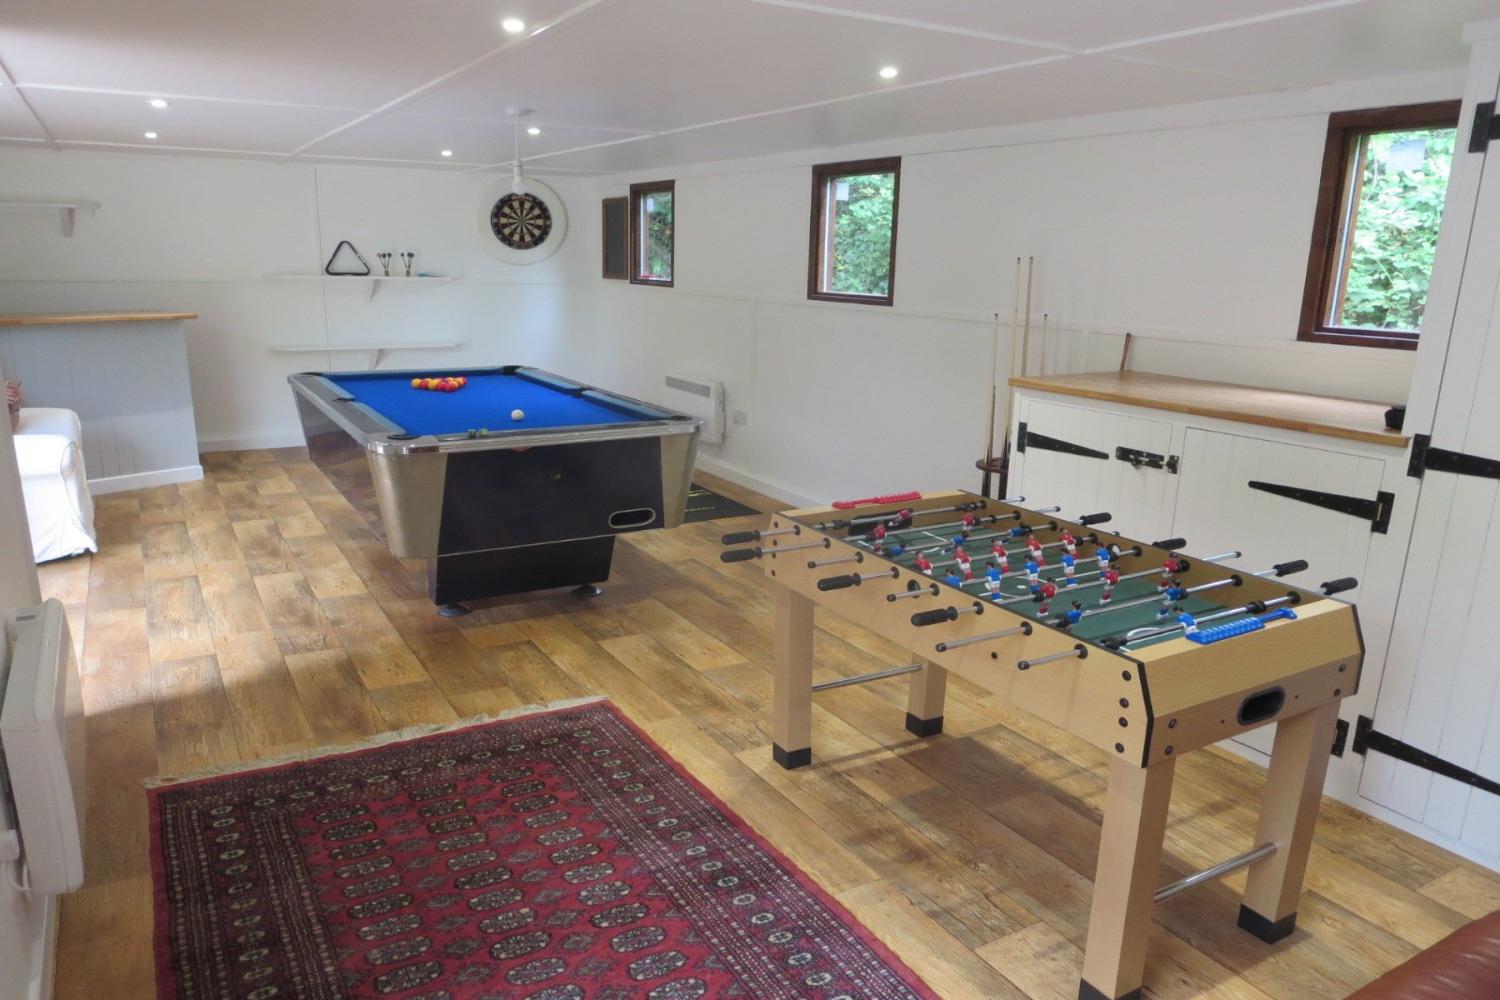 New games room in outbuilding